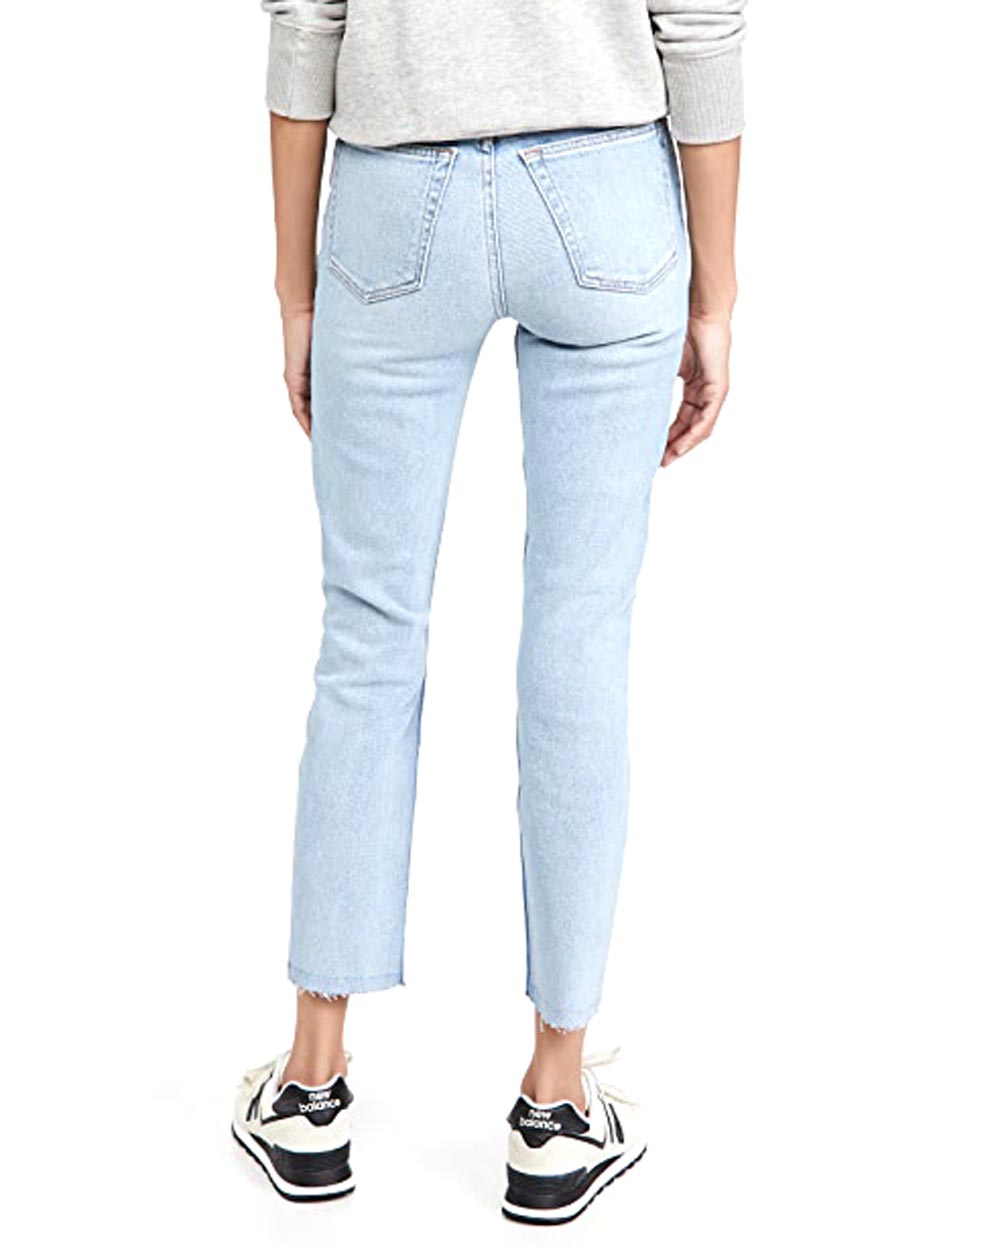 90s High Rise Ankle Crop Jean in Worn Light Blue